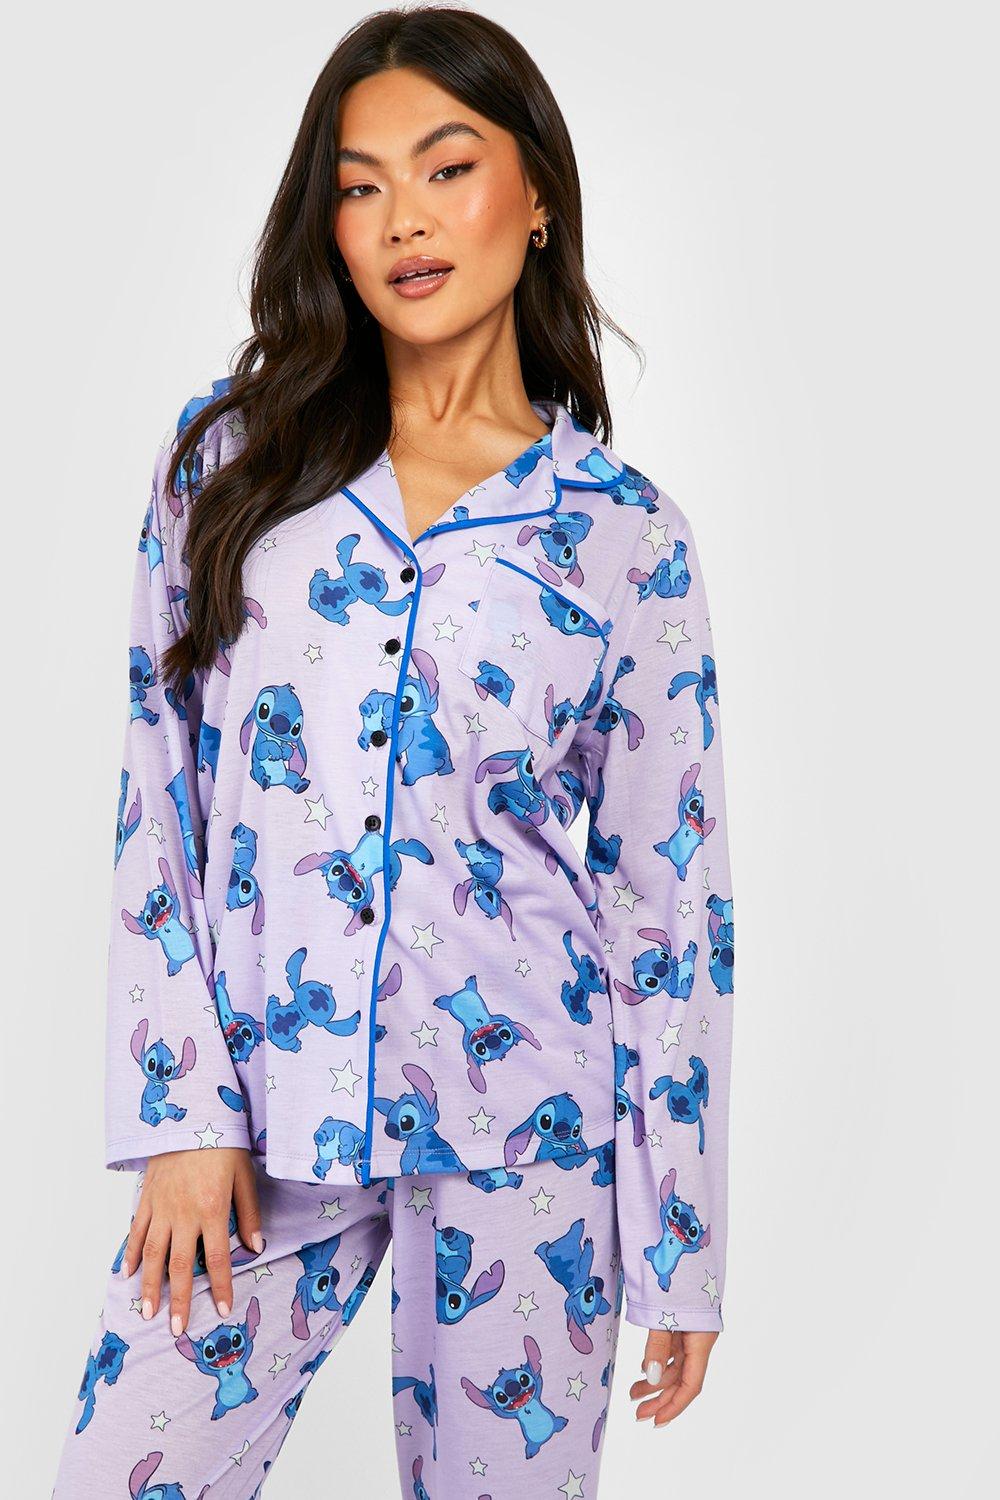 Stitch Pajamas (I would wear this all day, every day)